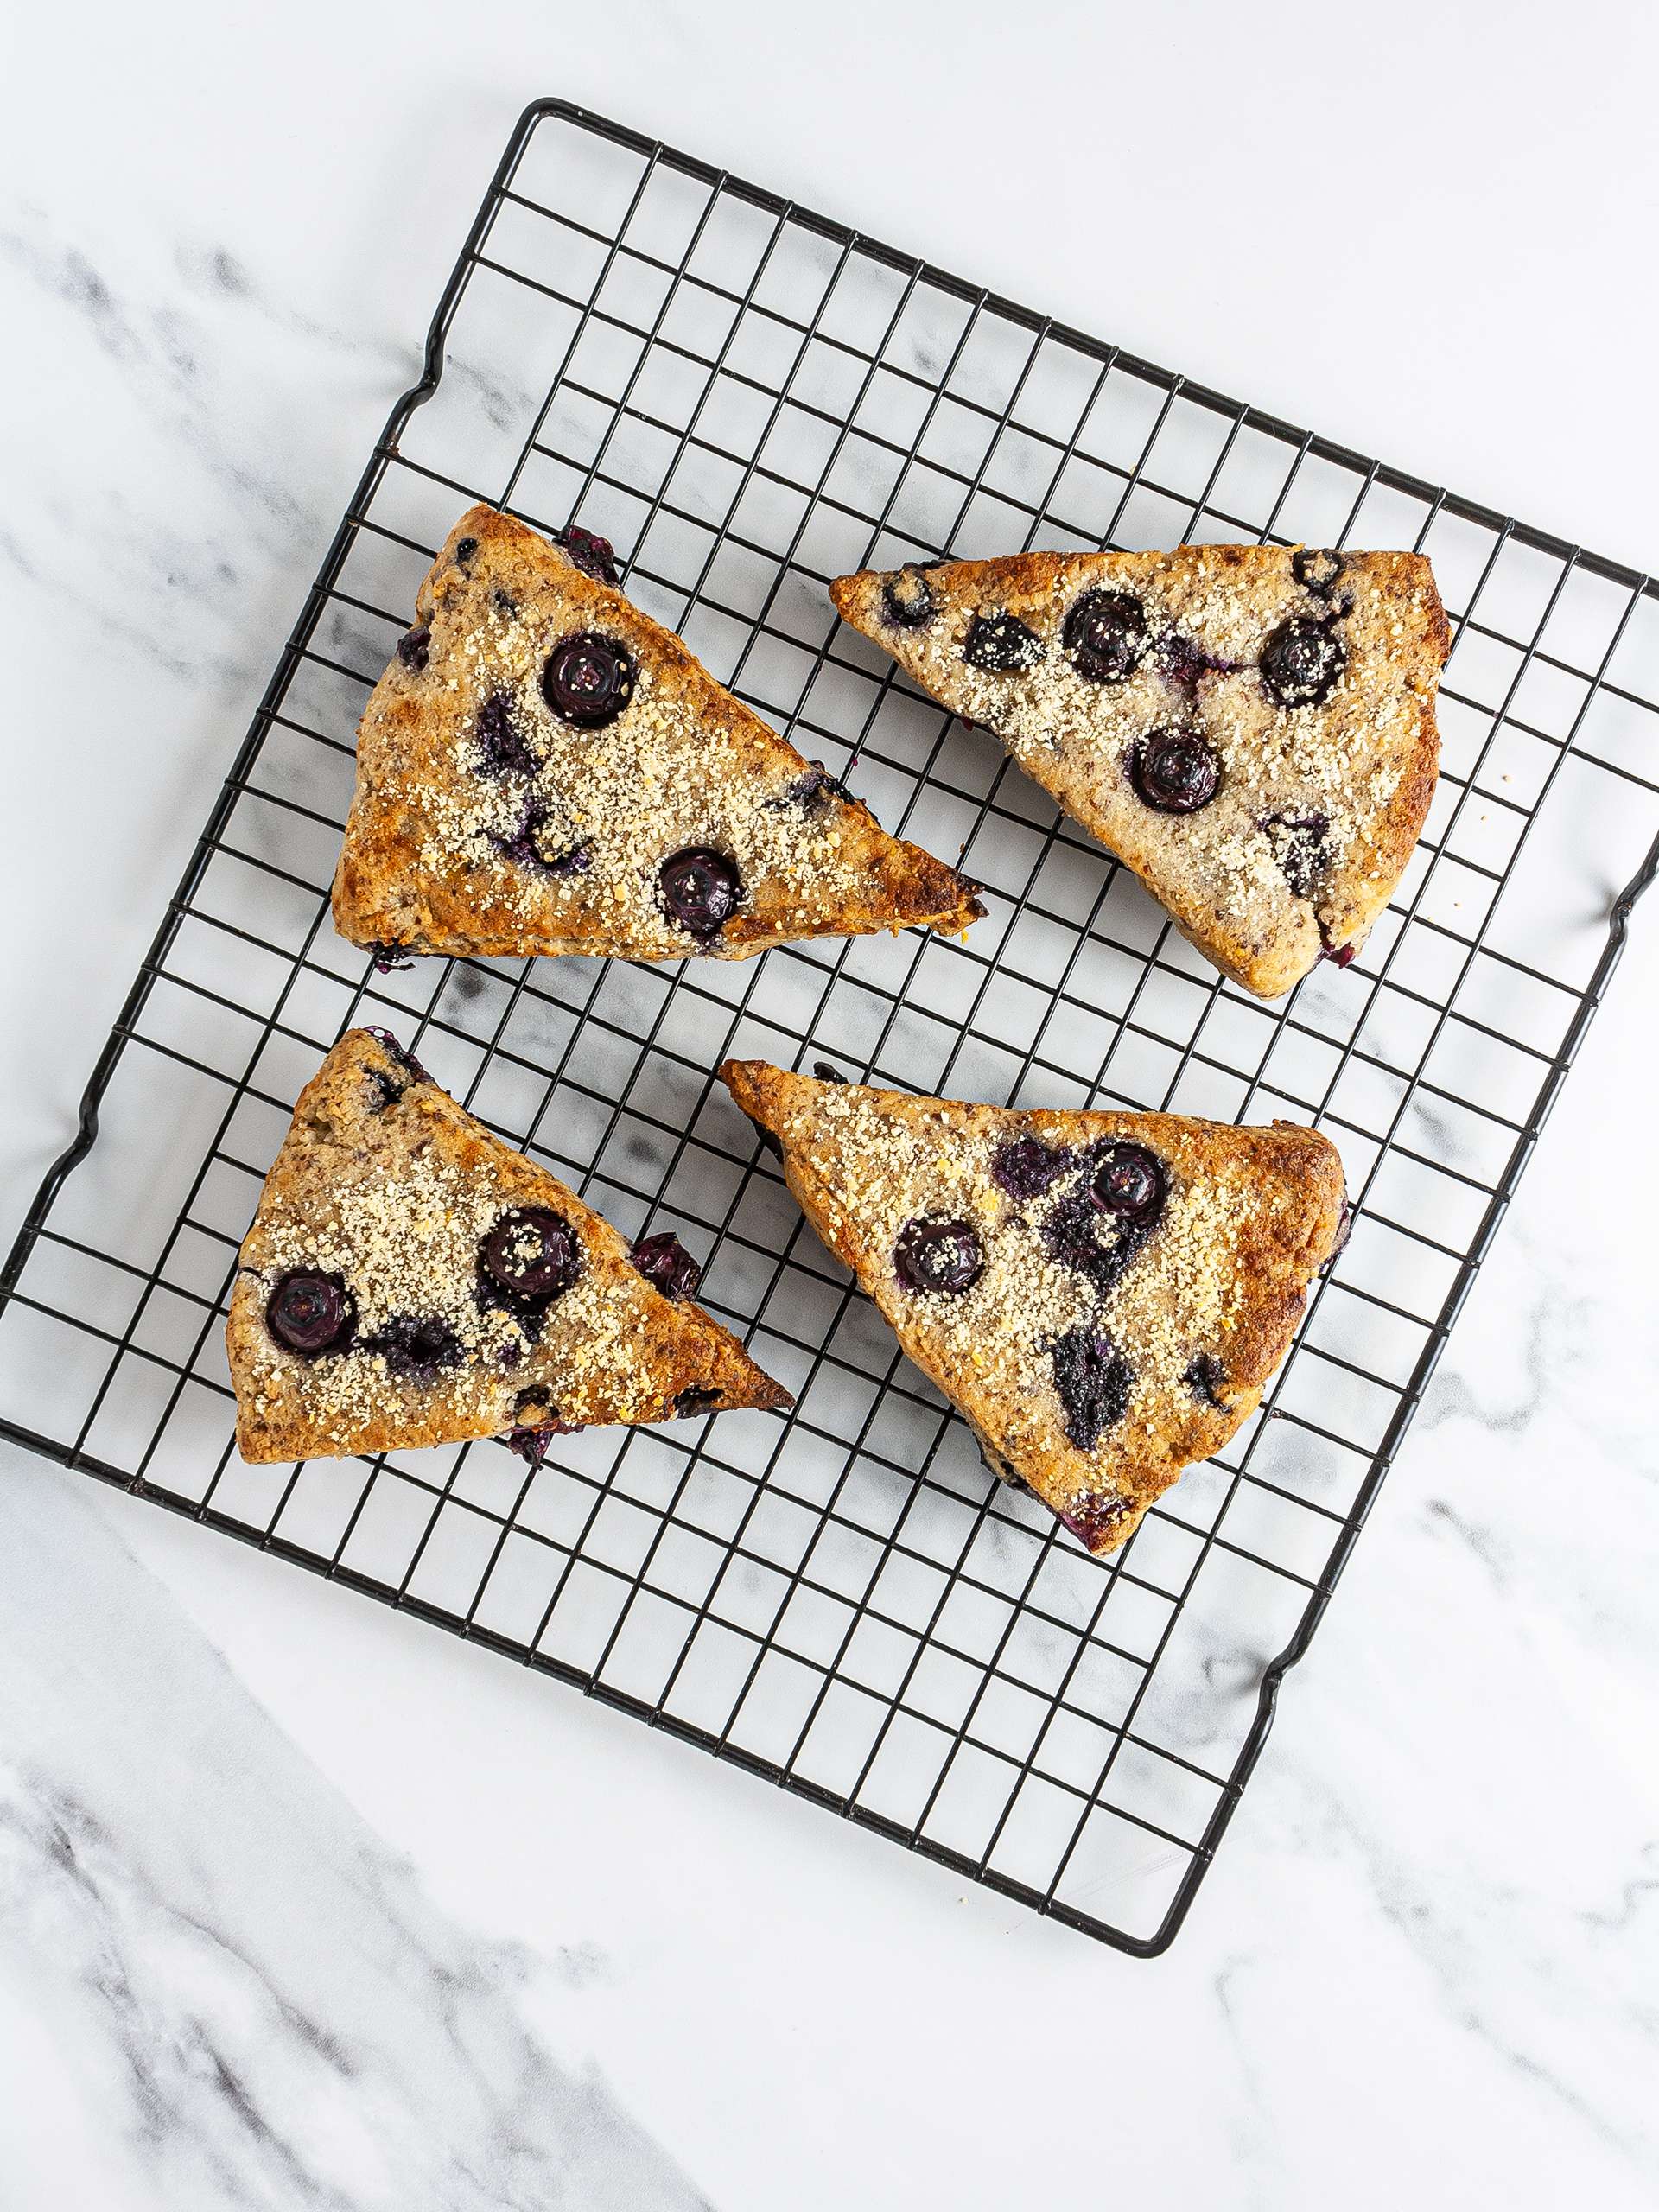 Baked blueberry scones on a cooling tray